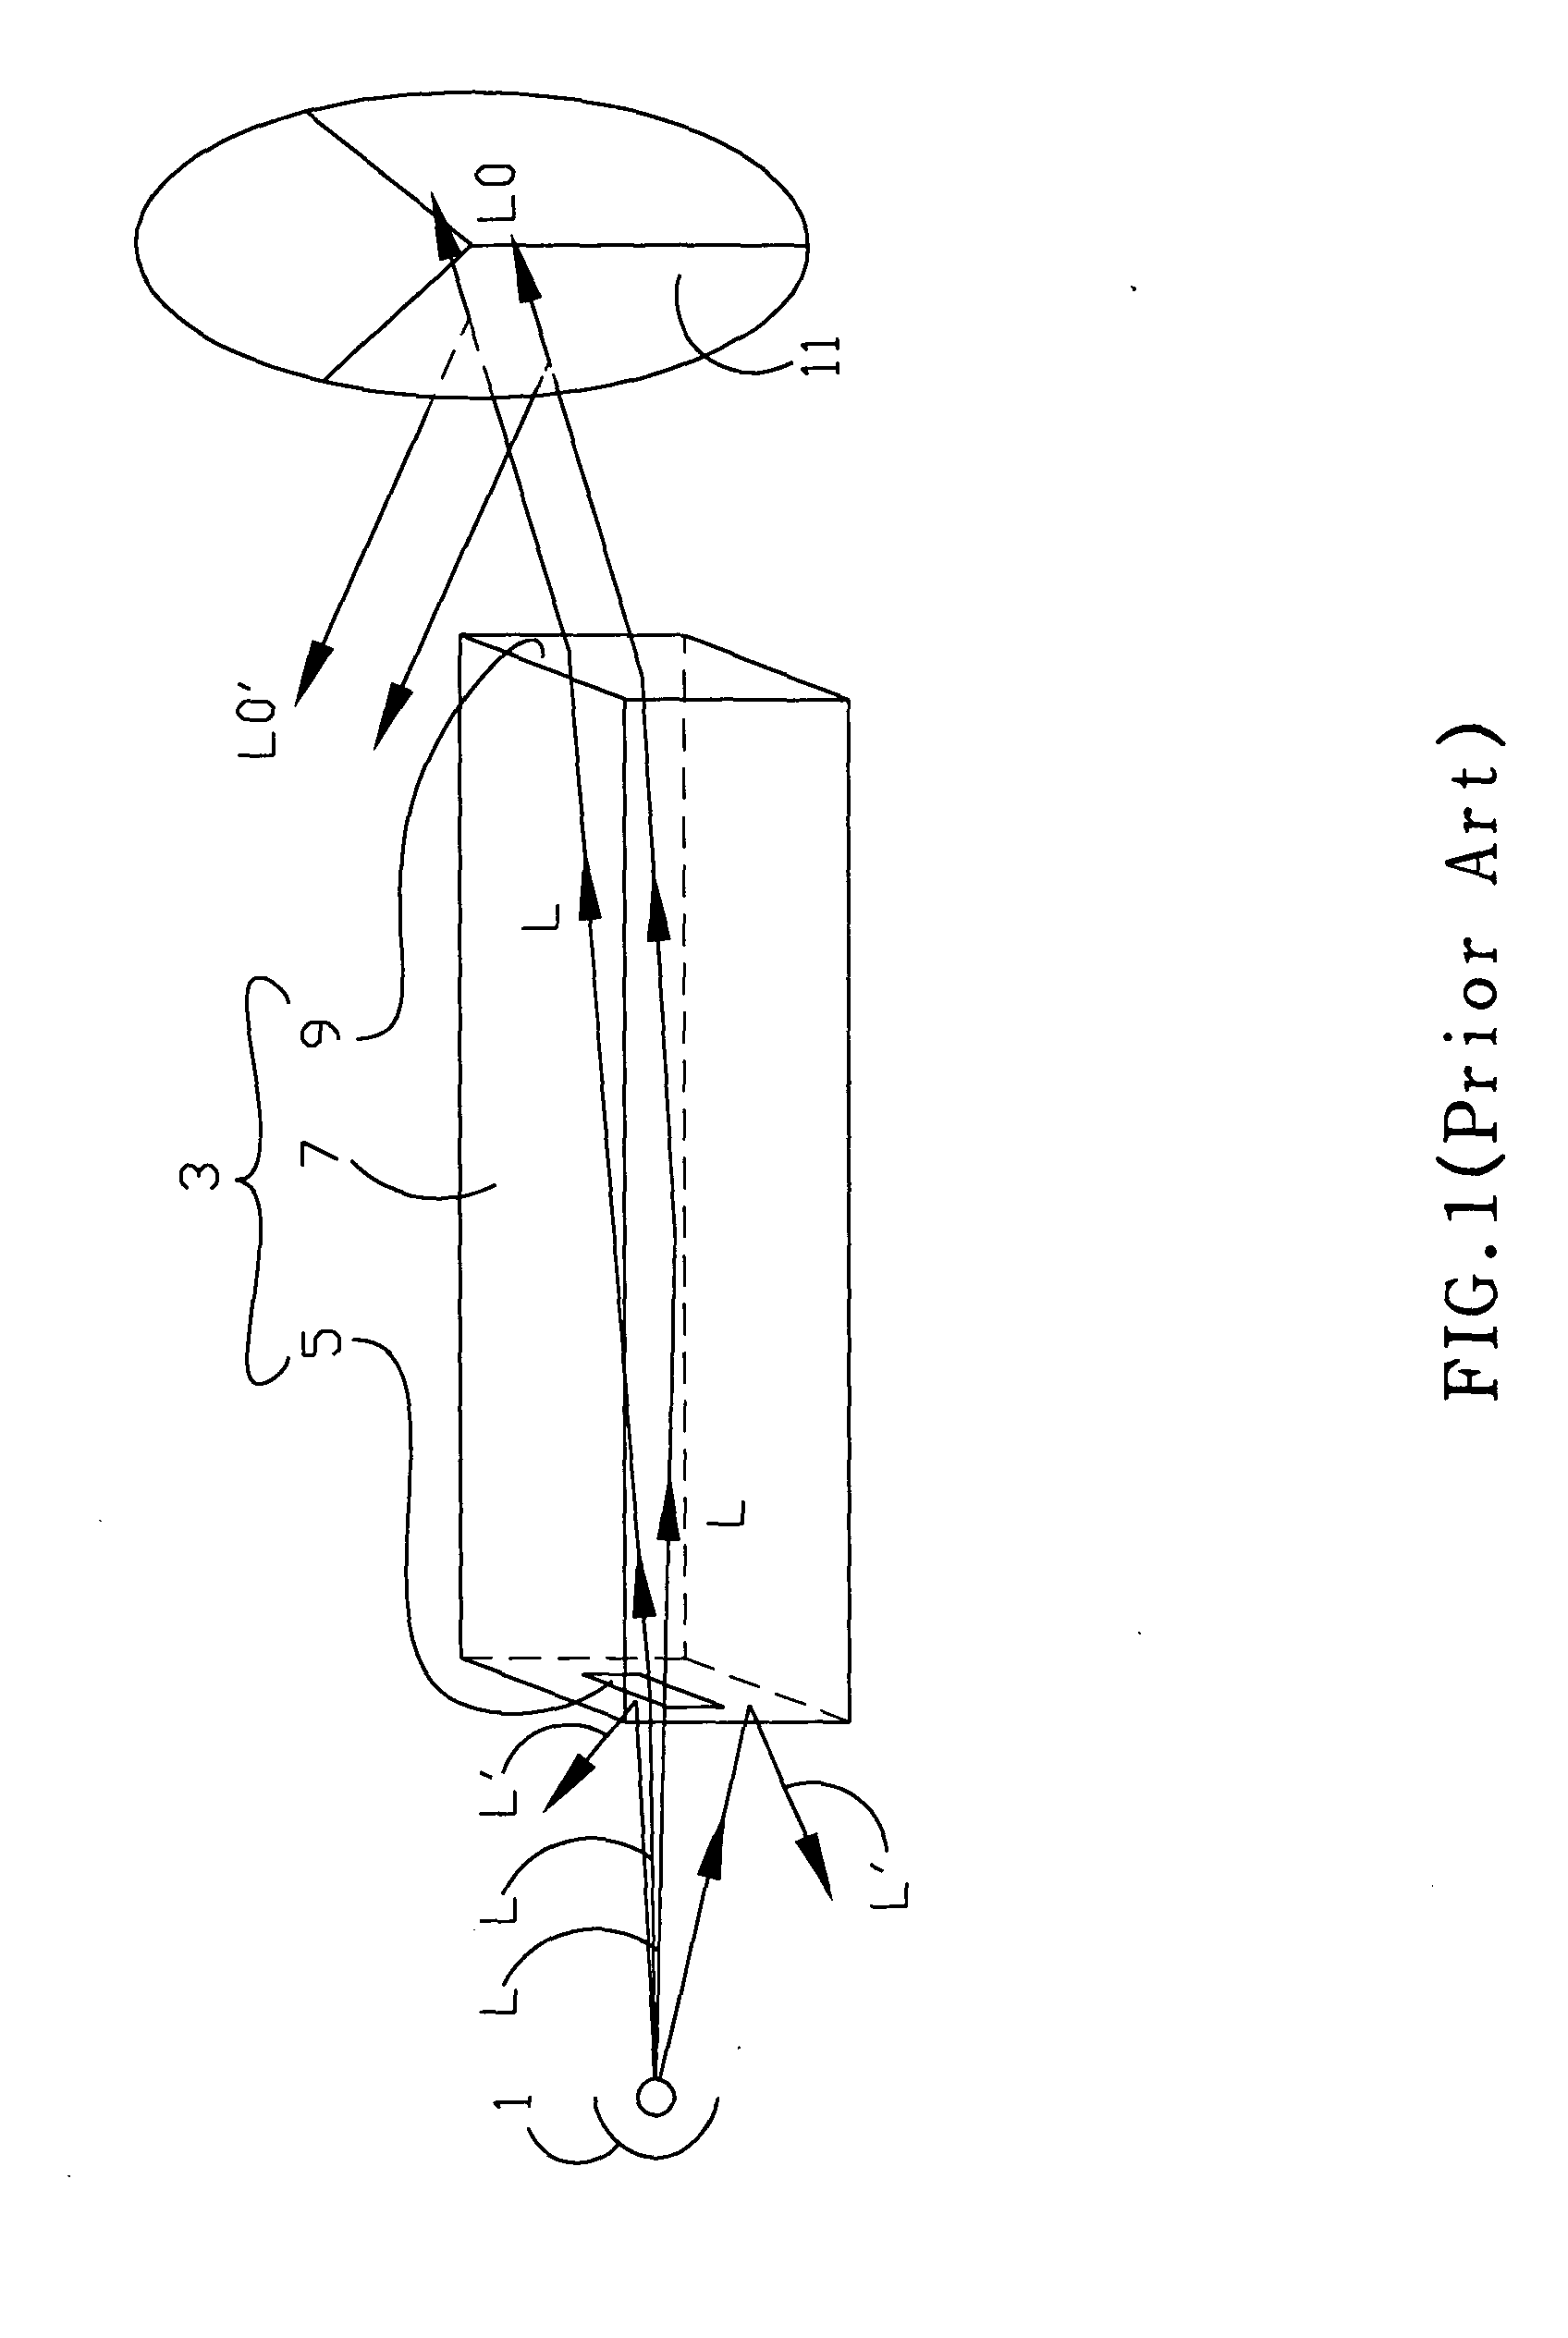 Optically integrated device